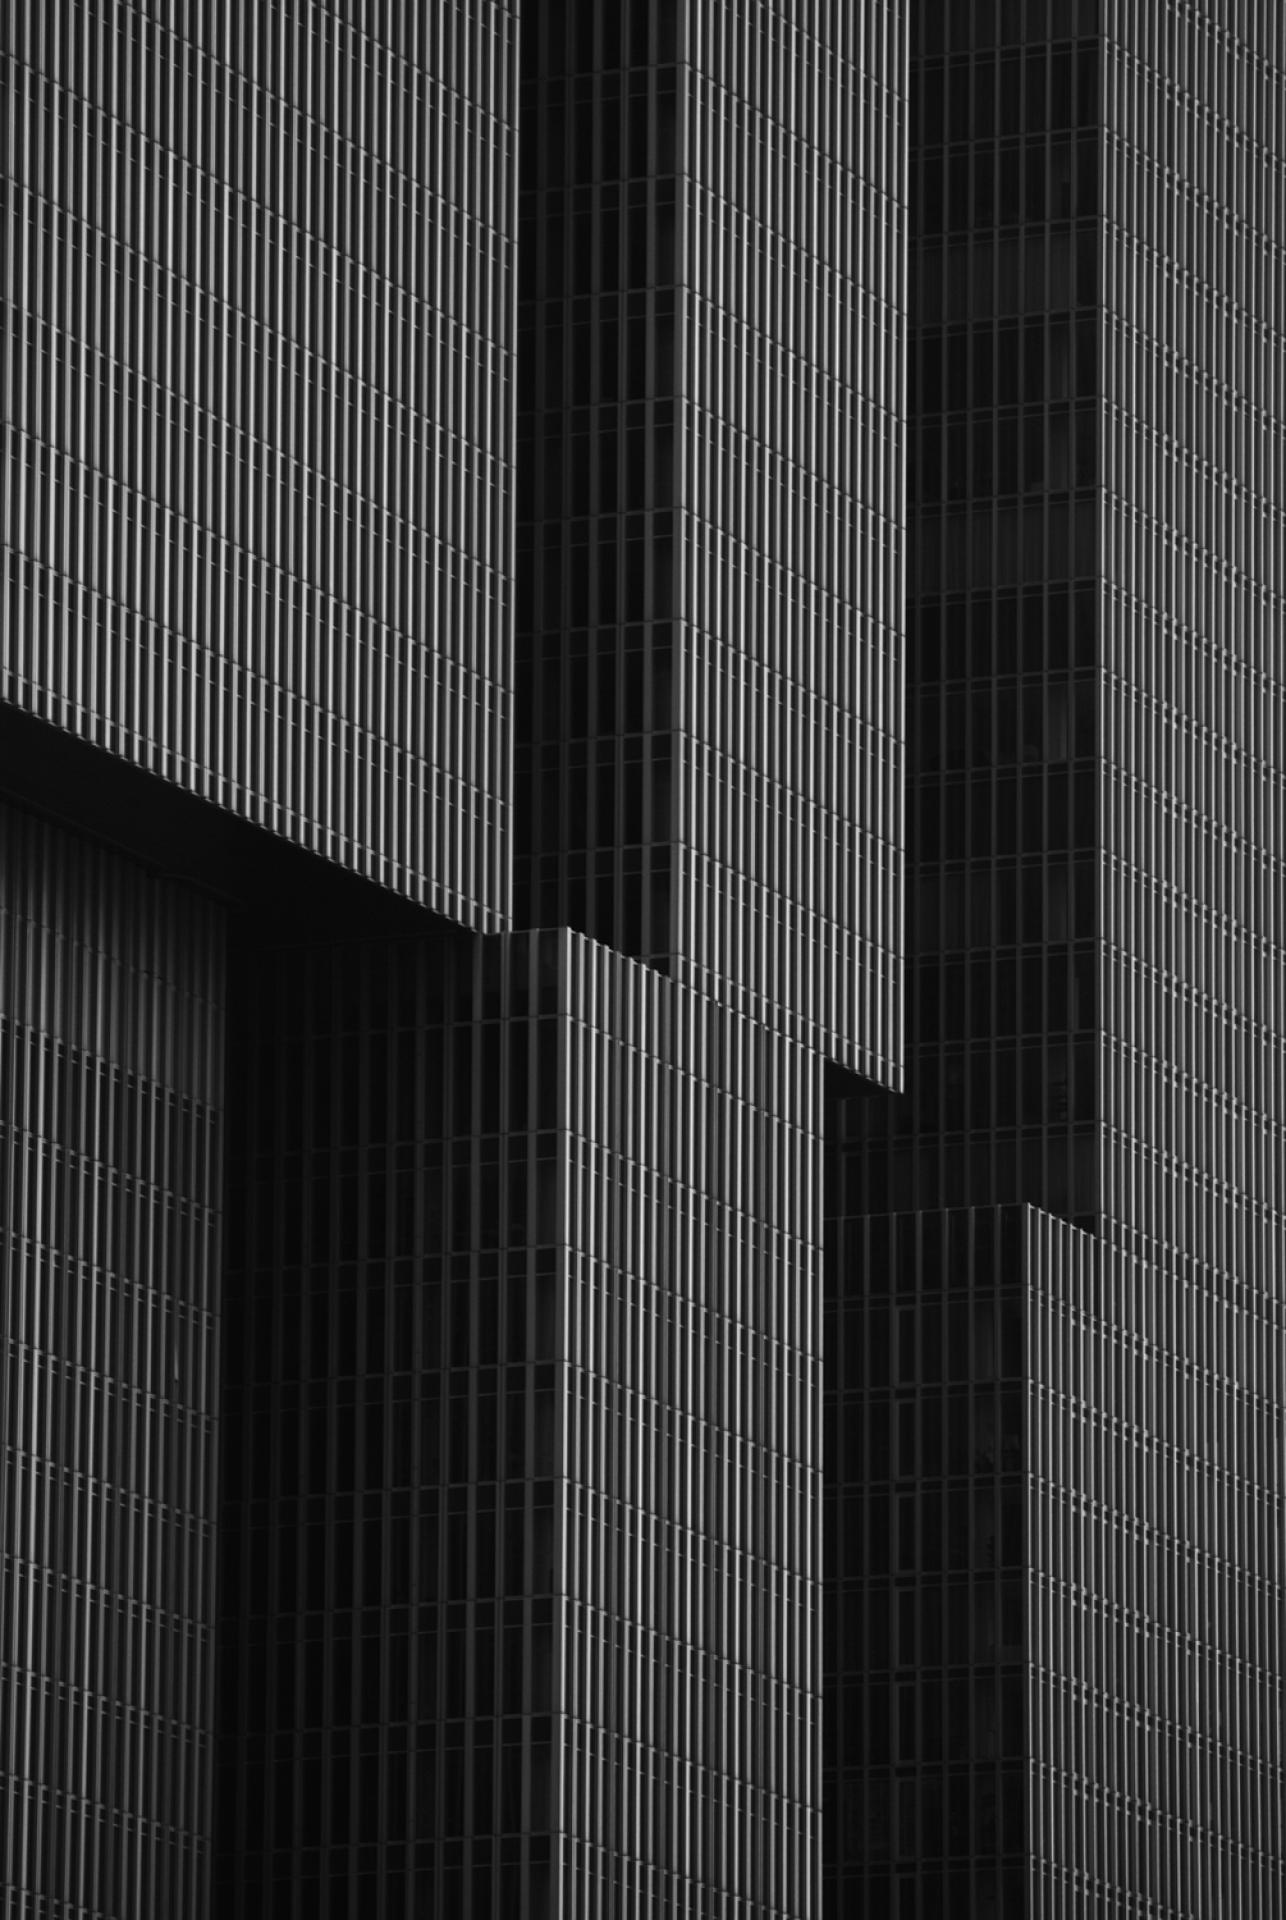 European Photography Awards Winner - Concrete and steel 